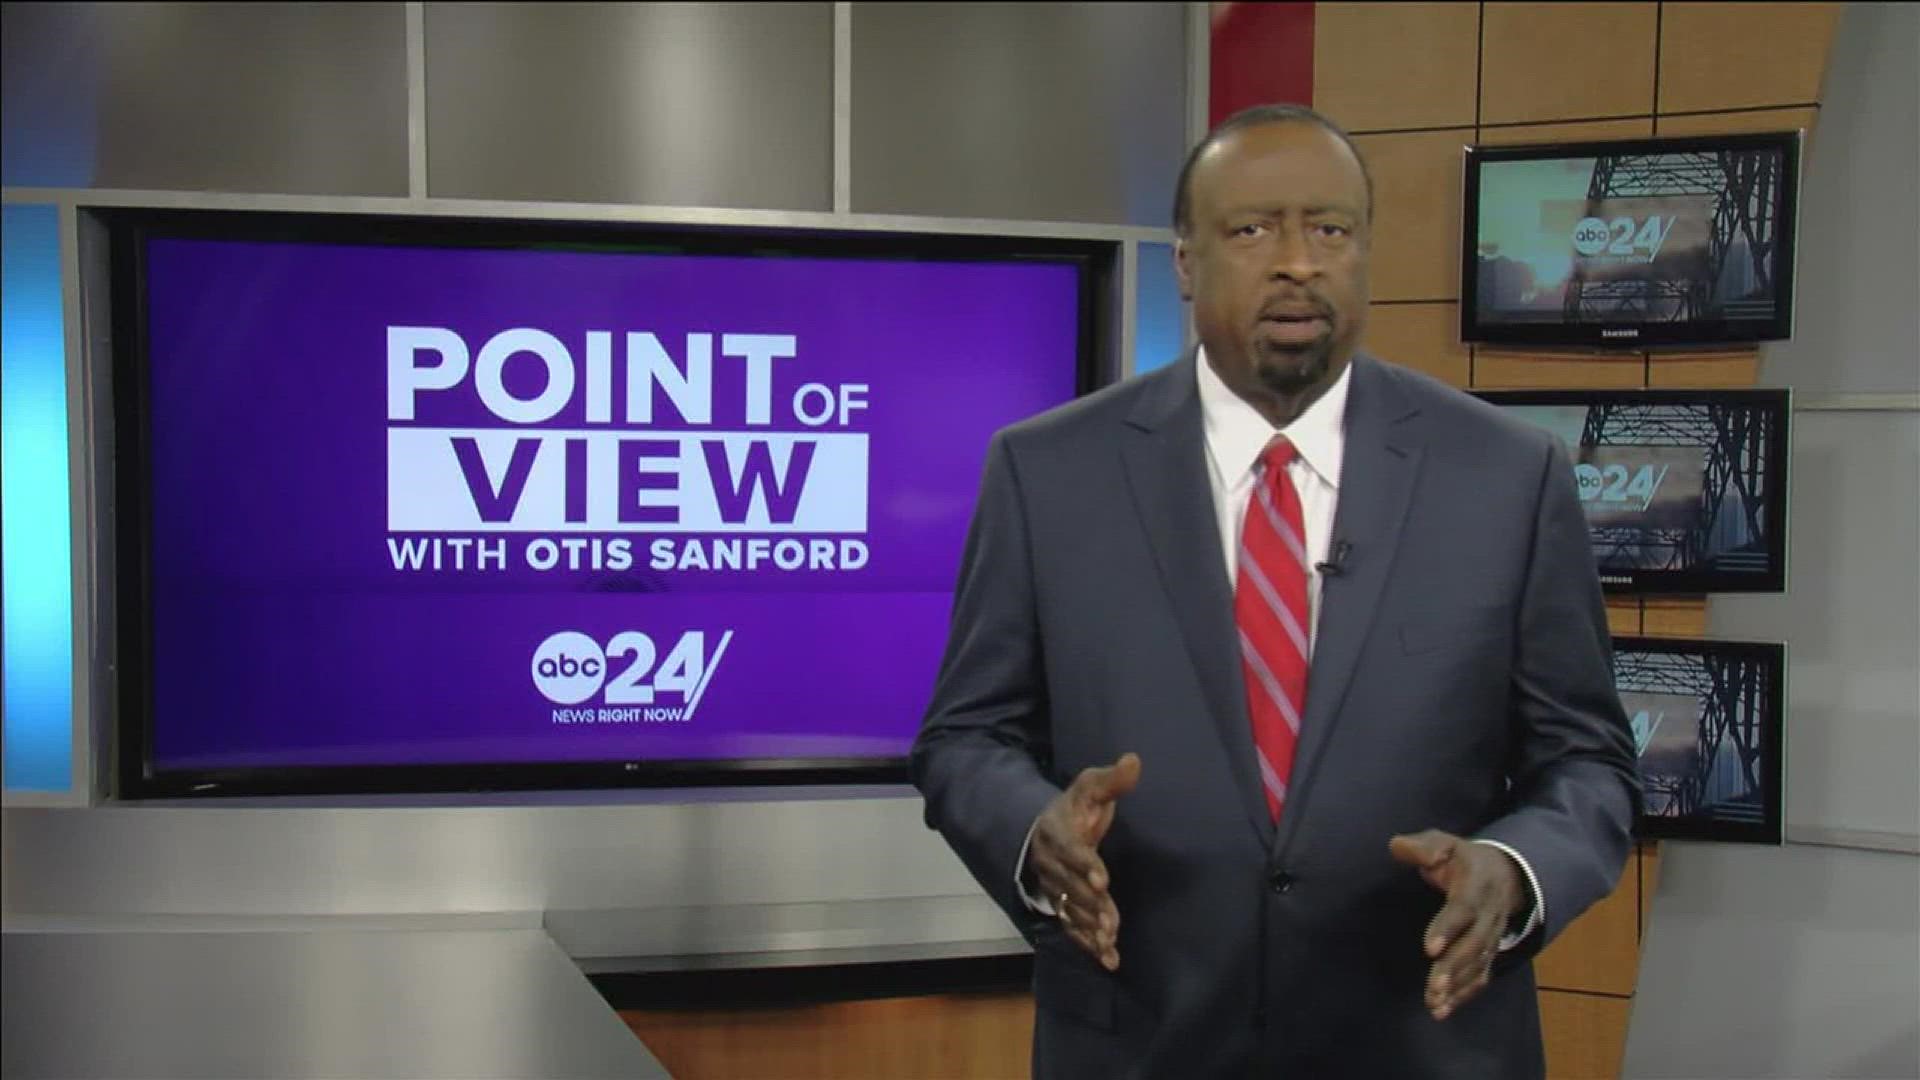 ABC 24 political analyst and commentator Otis Sanford shared his point of view on the redistricting in Tennessee.